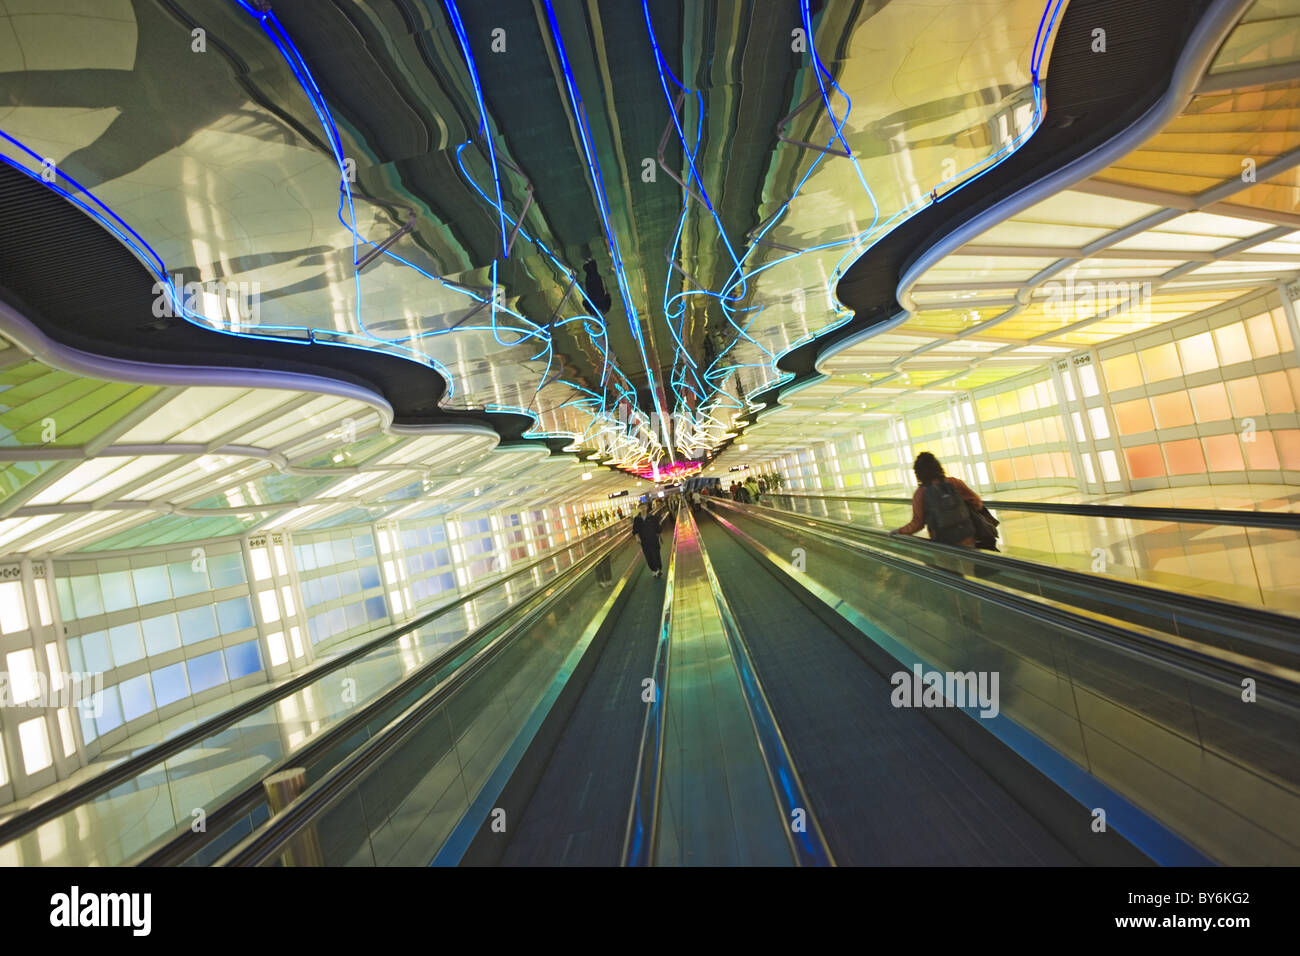 Light sculptures and moving walkway at O'Hare International Airport, Chicago, Illinois, USA Stock Photo